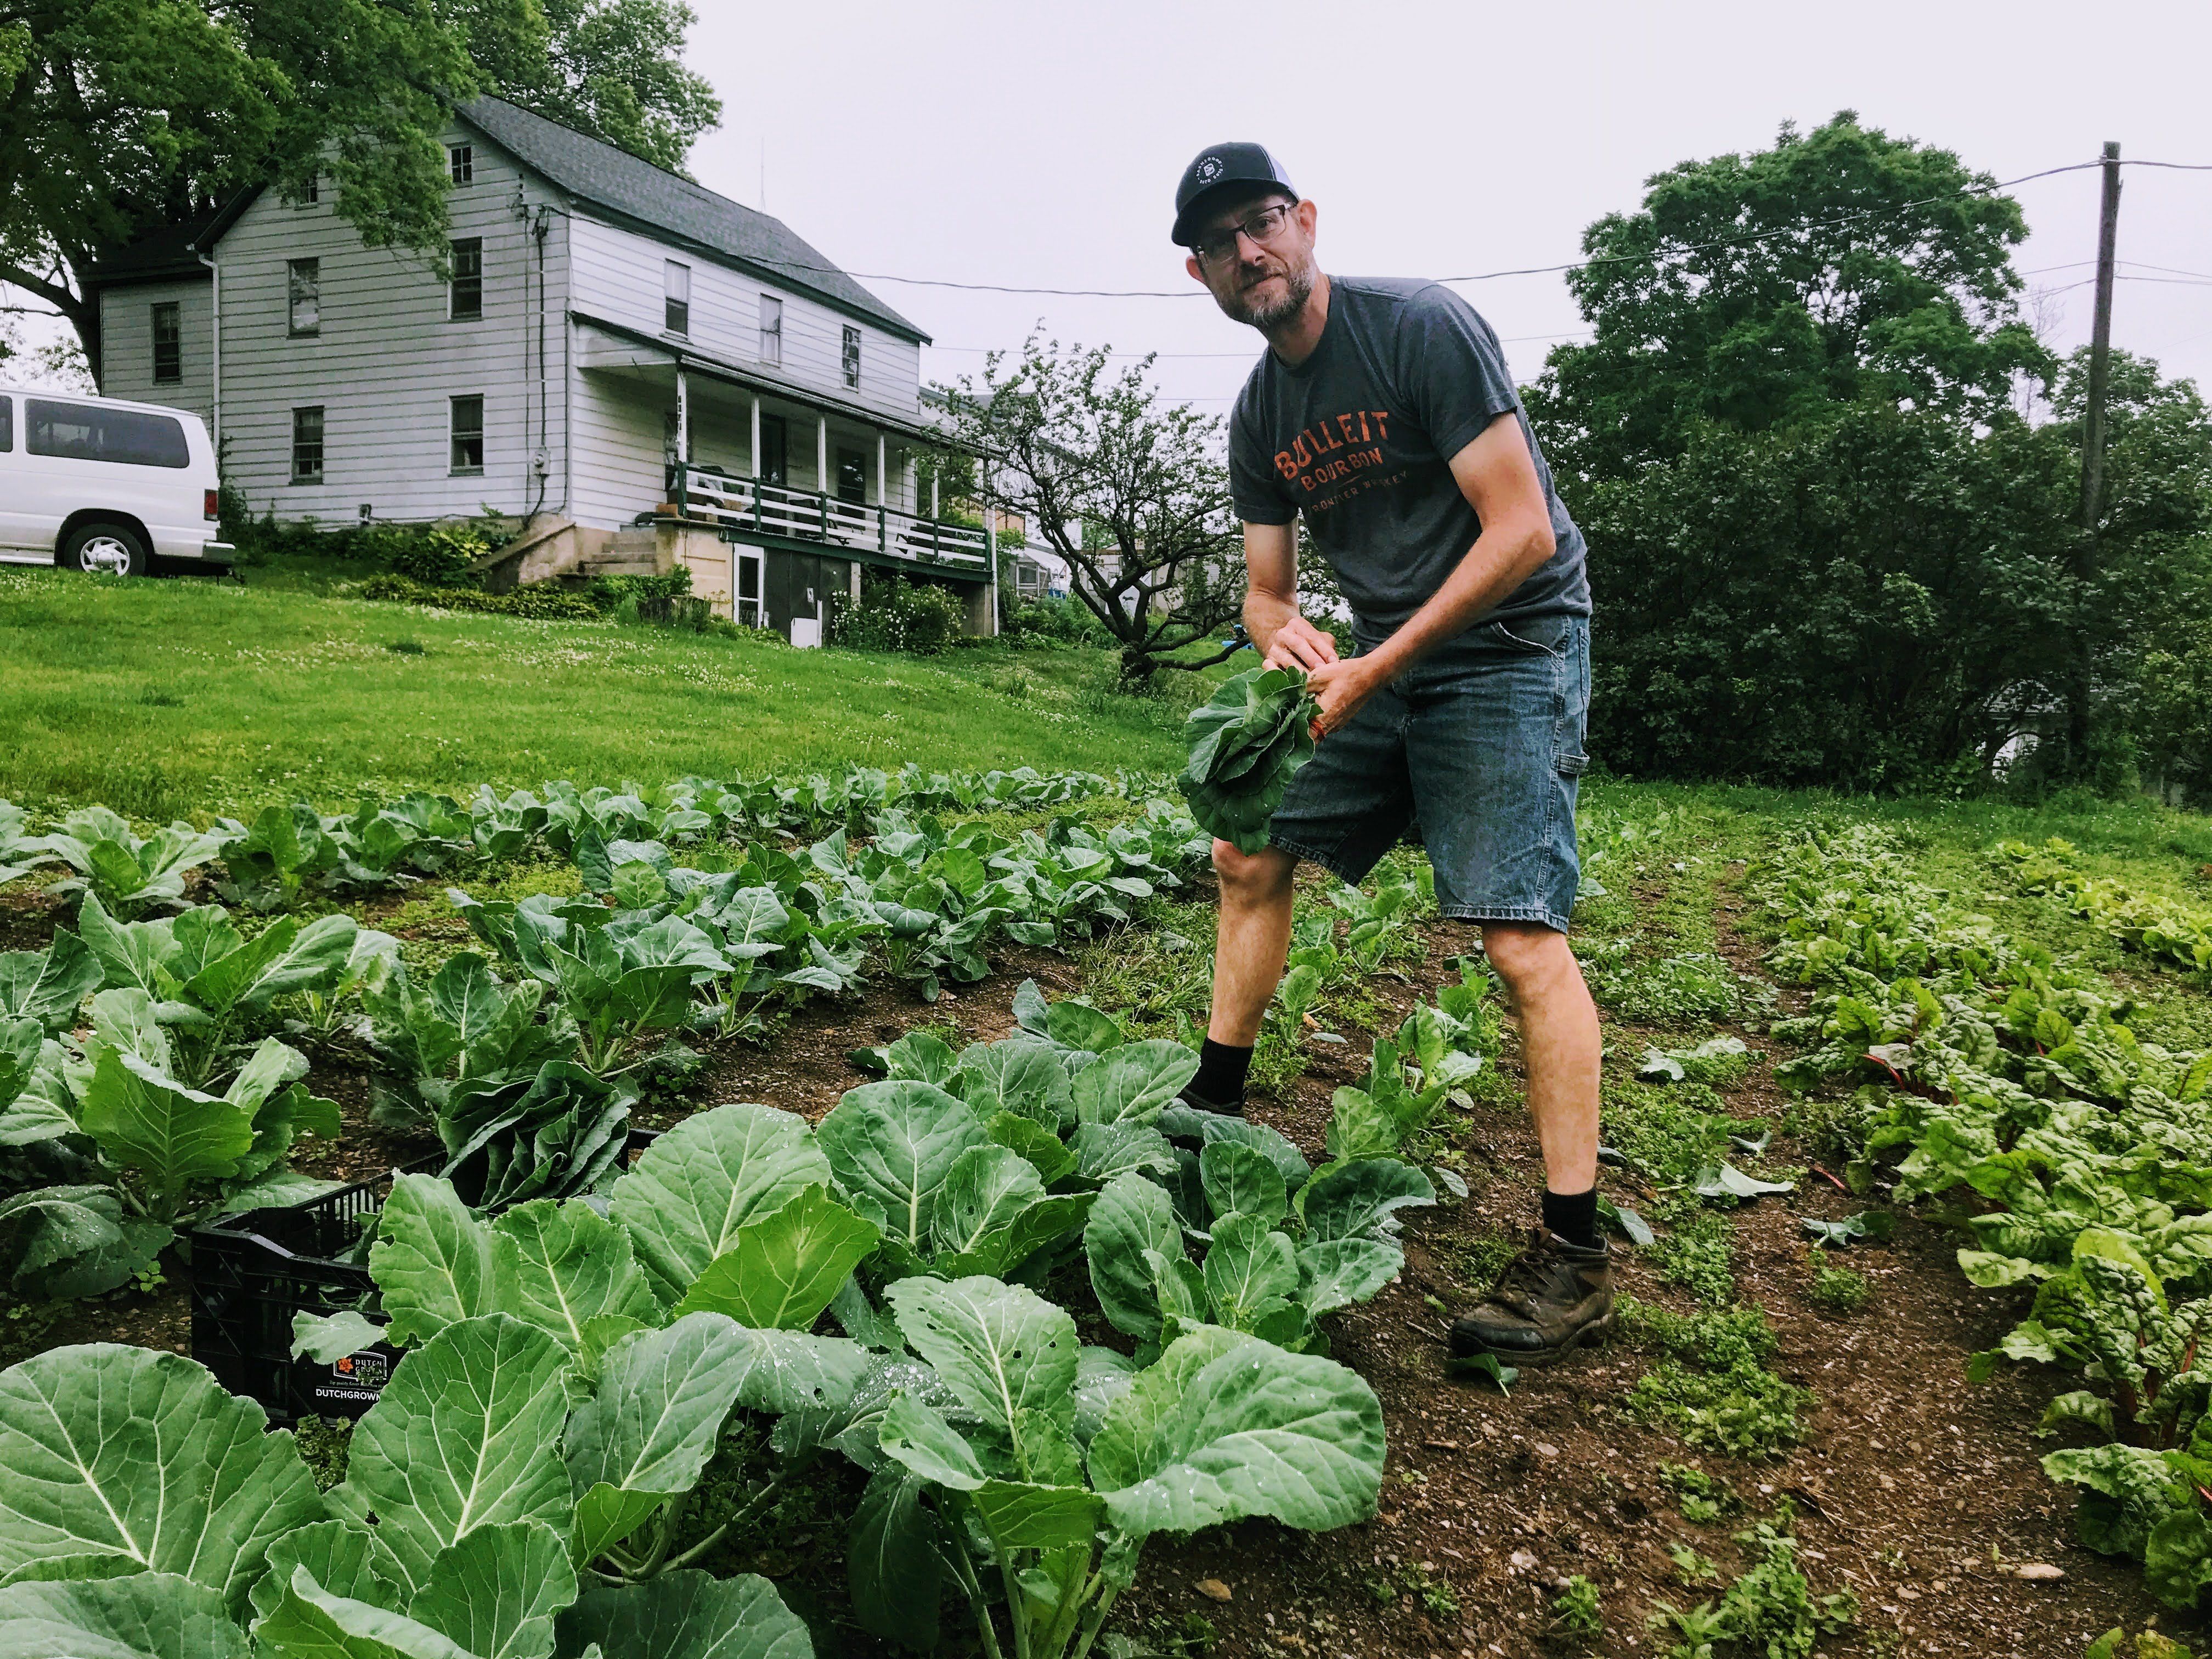 Next Happening: Farmer learns how to save veggies from the bugs